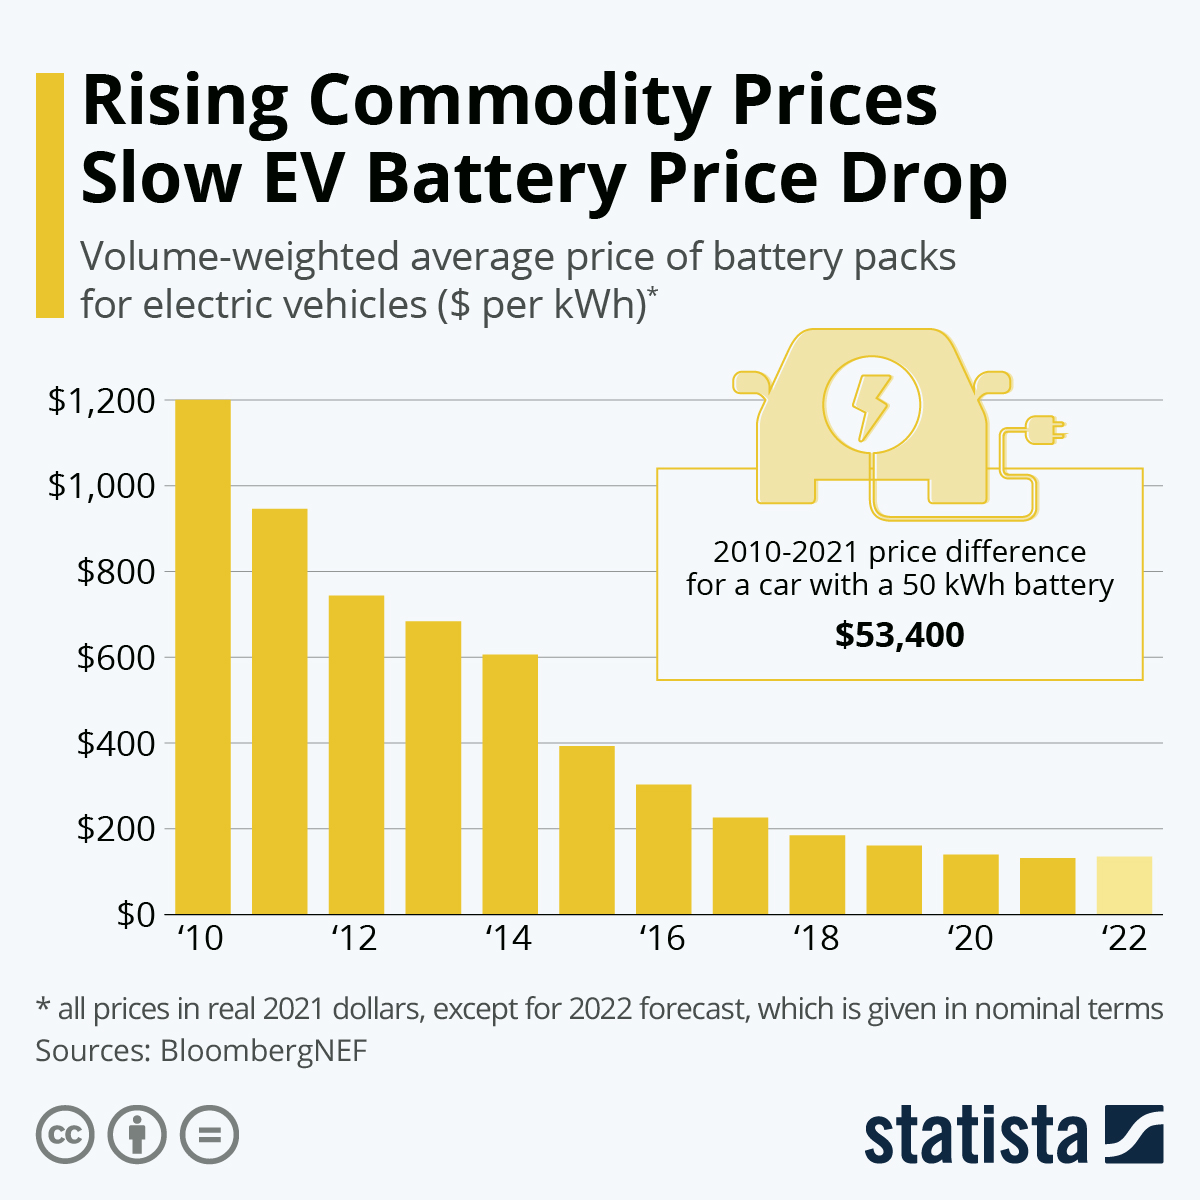 Rising Commodity Prices Slow EV Battery Price Drop